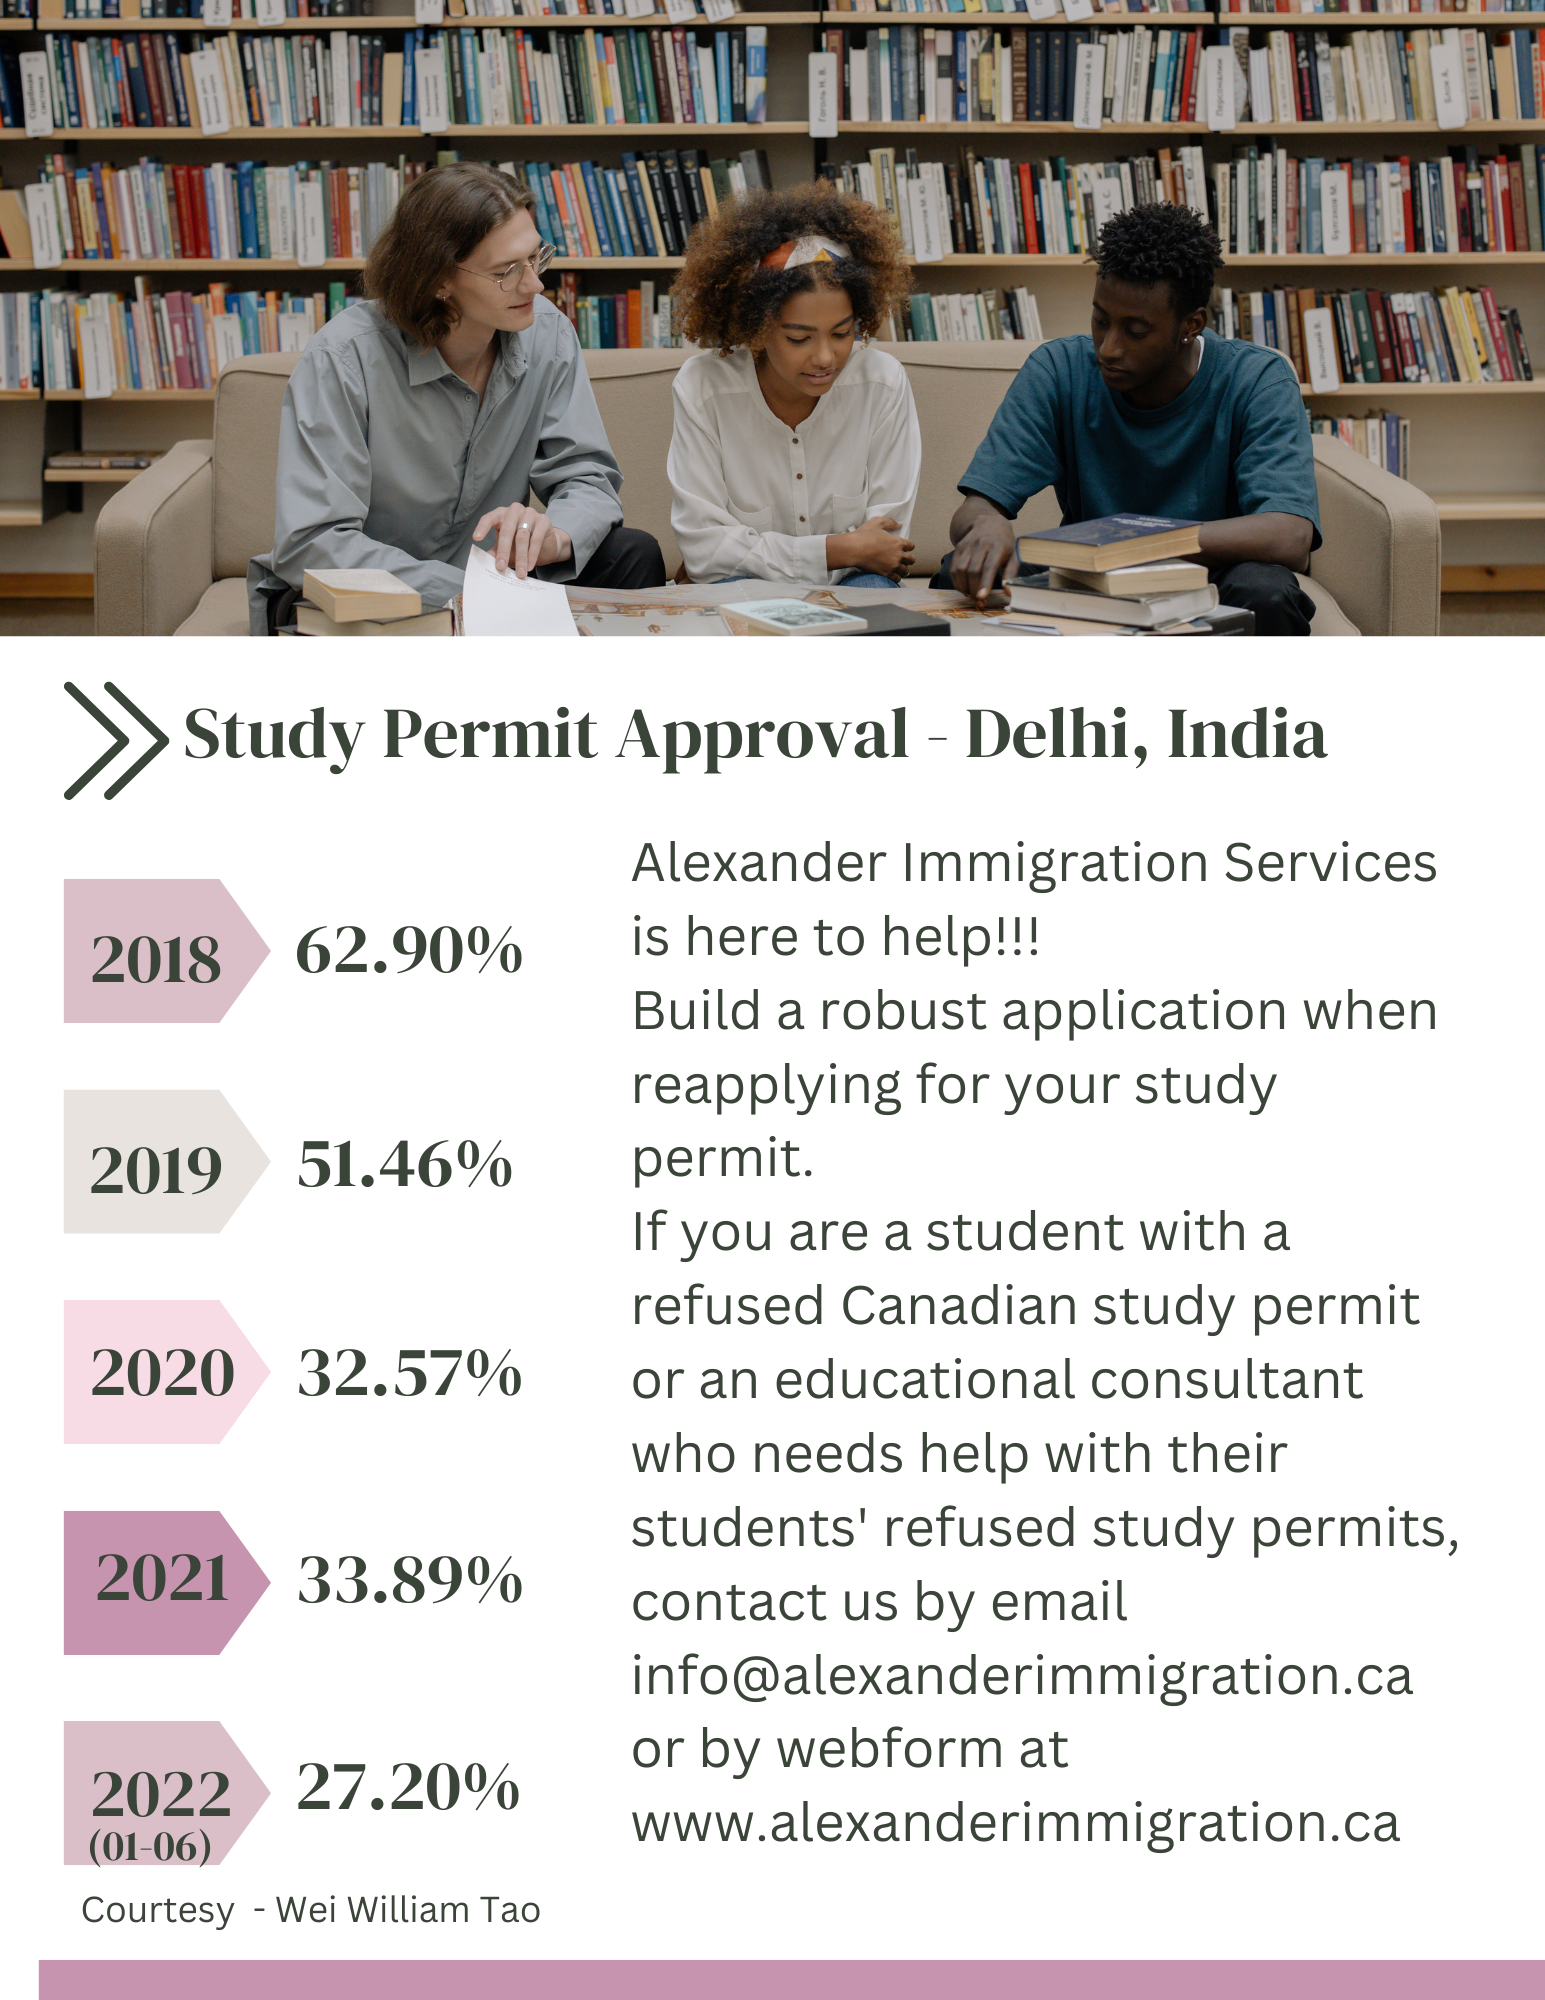 Decline in Canadian Study Permit Approvals